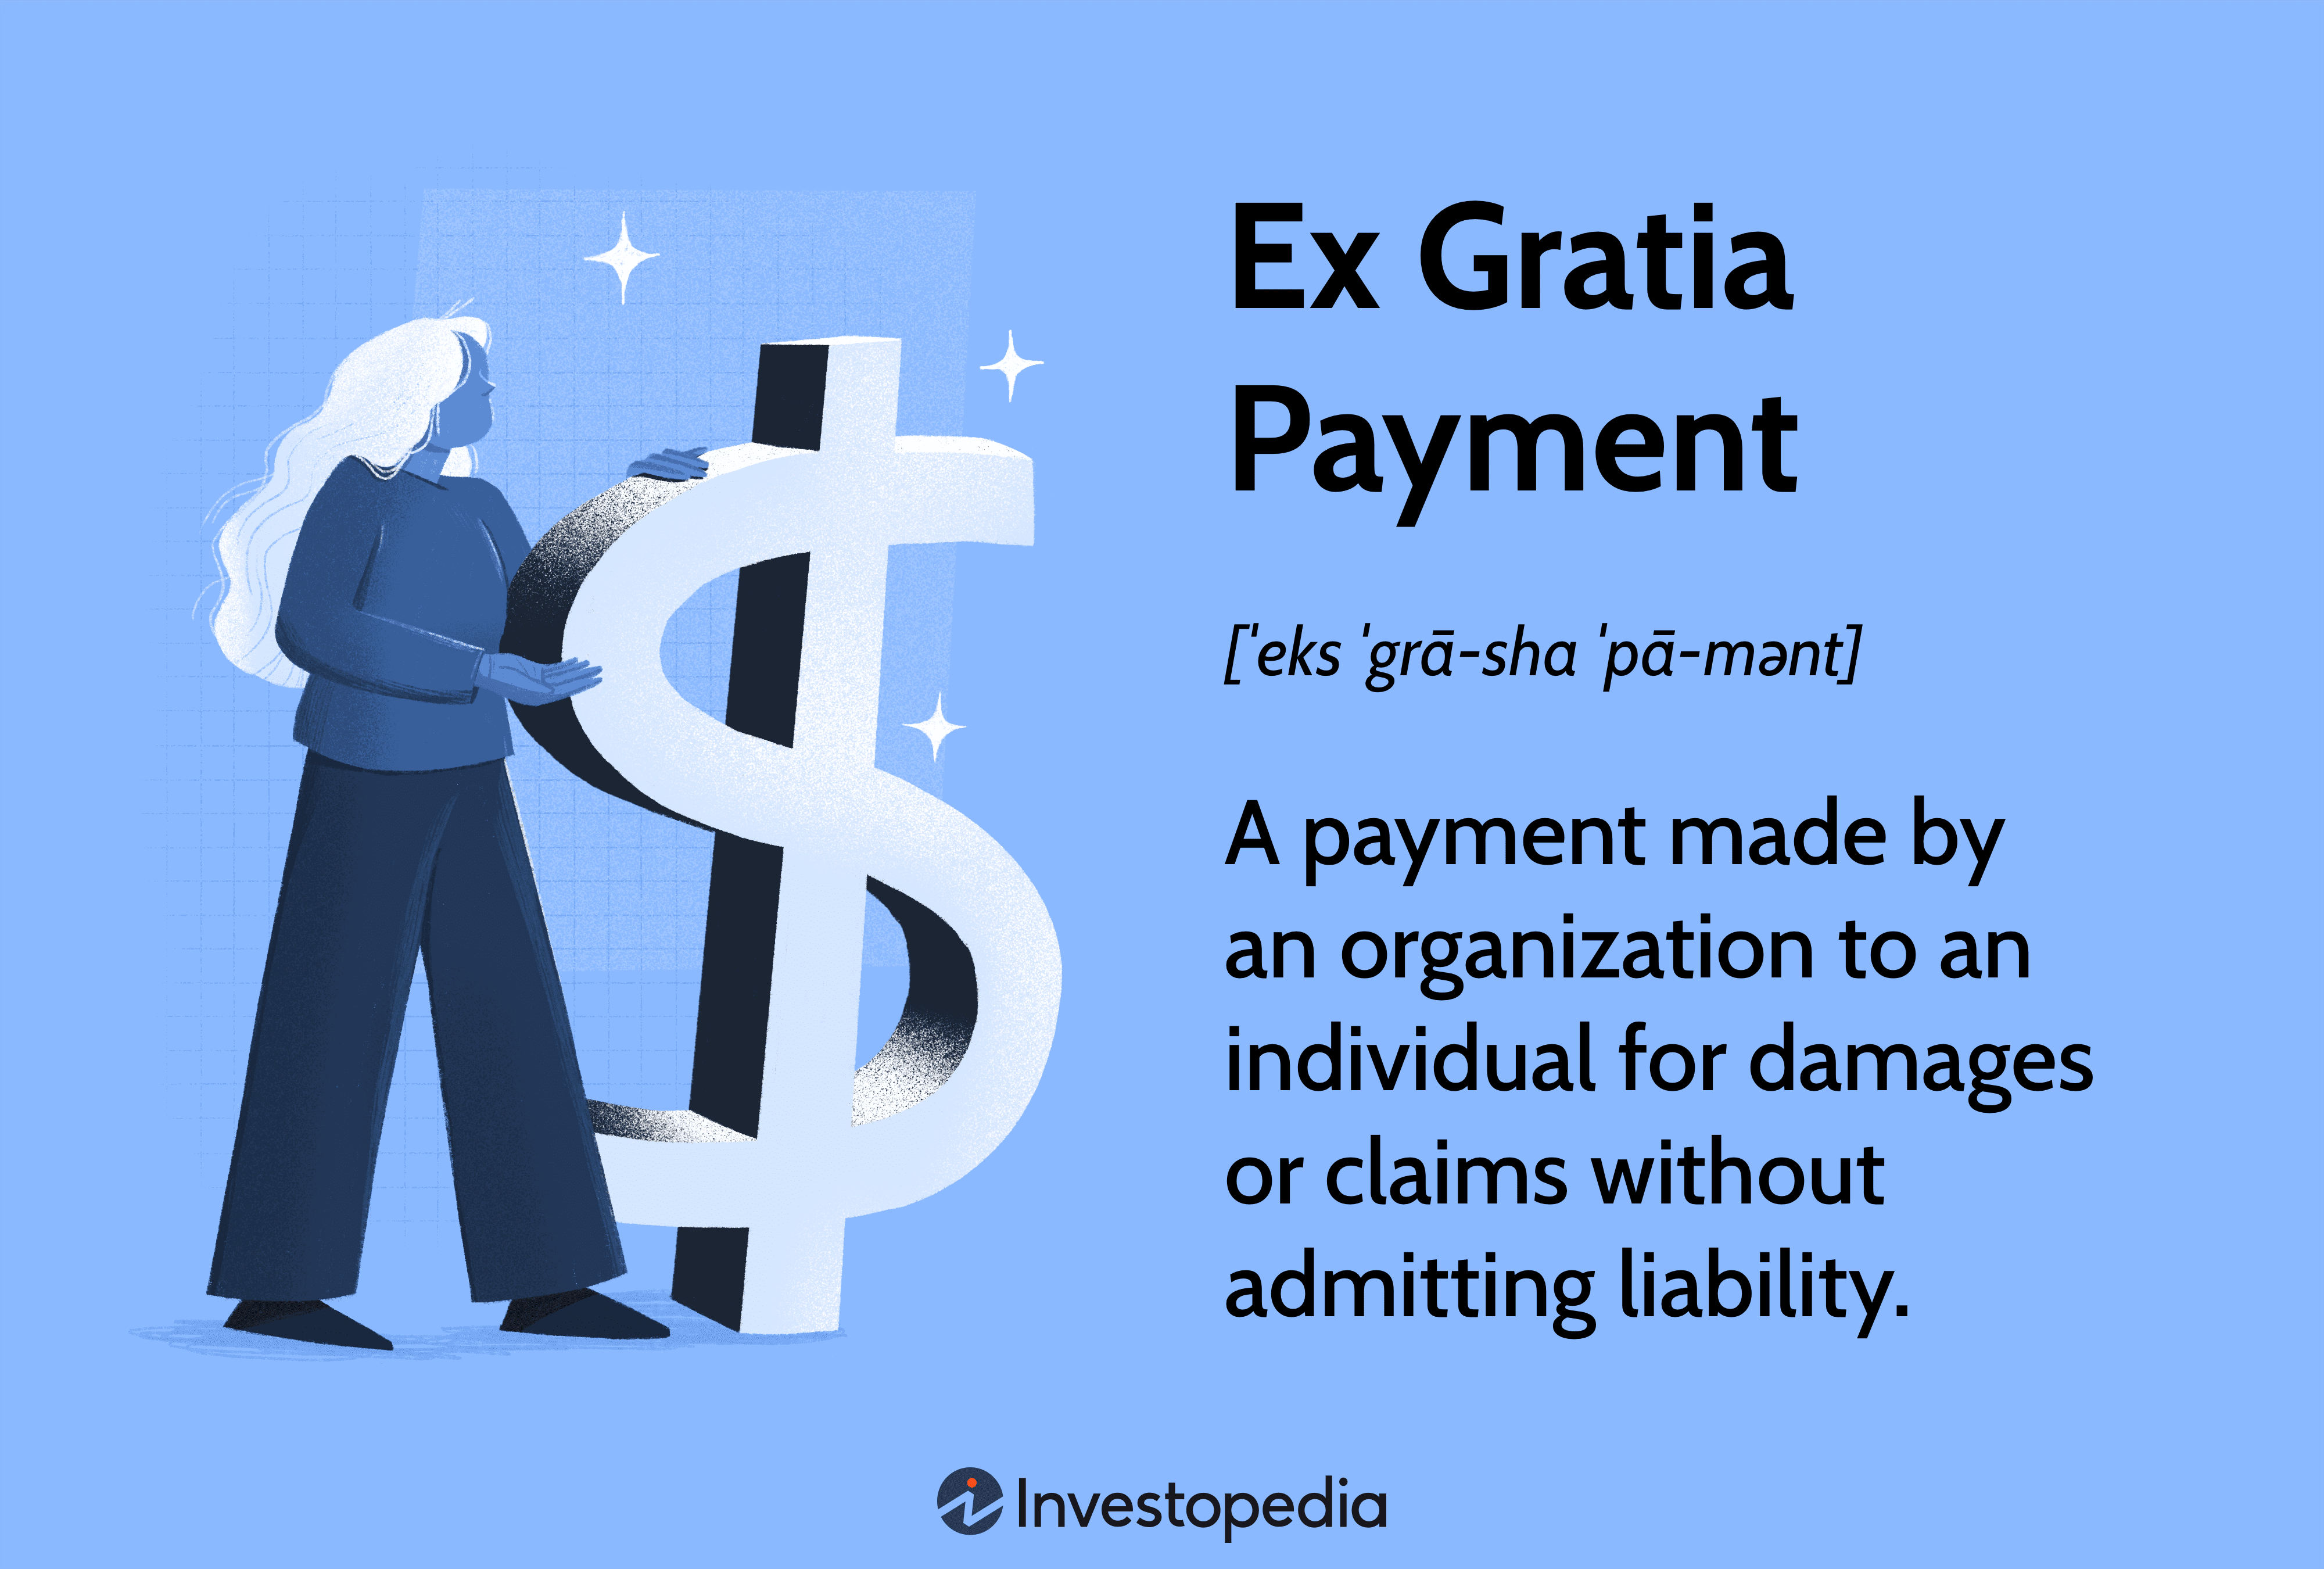 Ex Gratia Payment: A payment made by an organization to an individual for damages or claims without admitting liability.